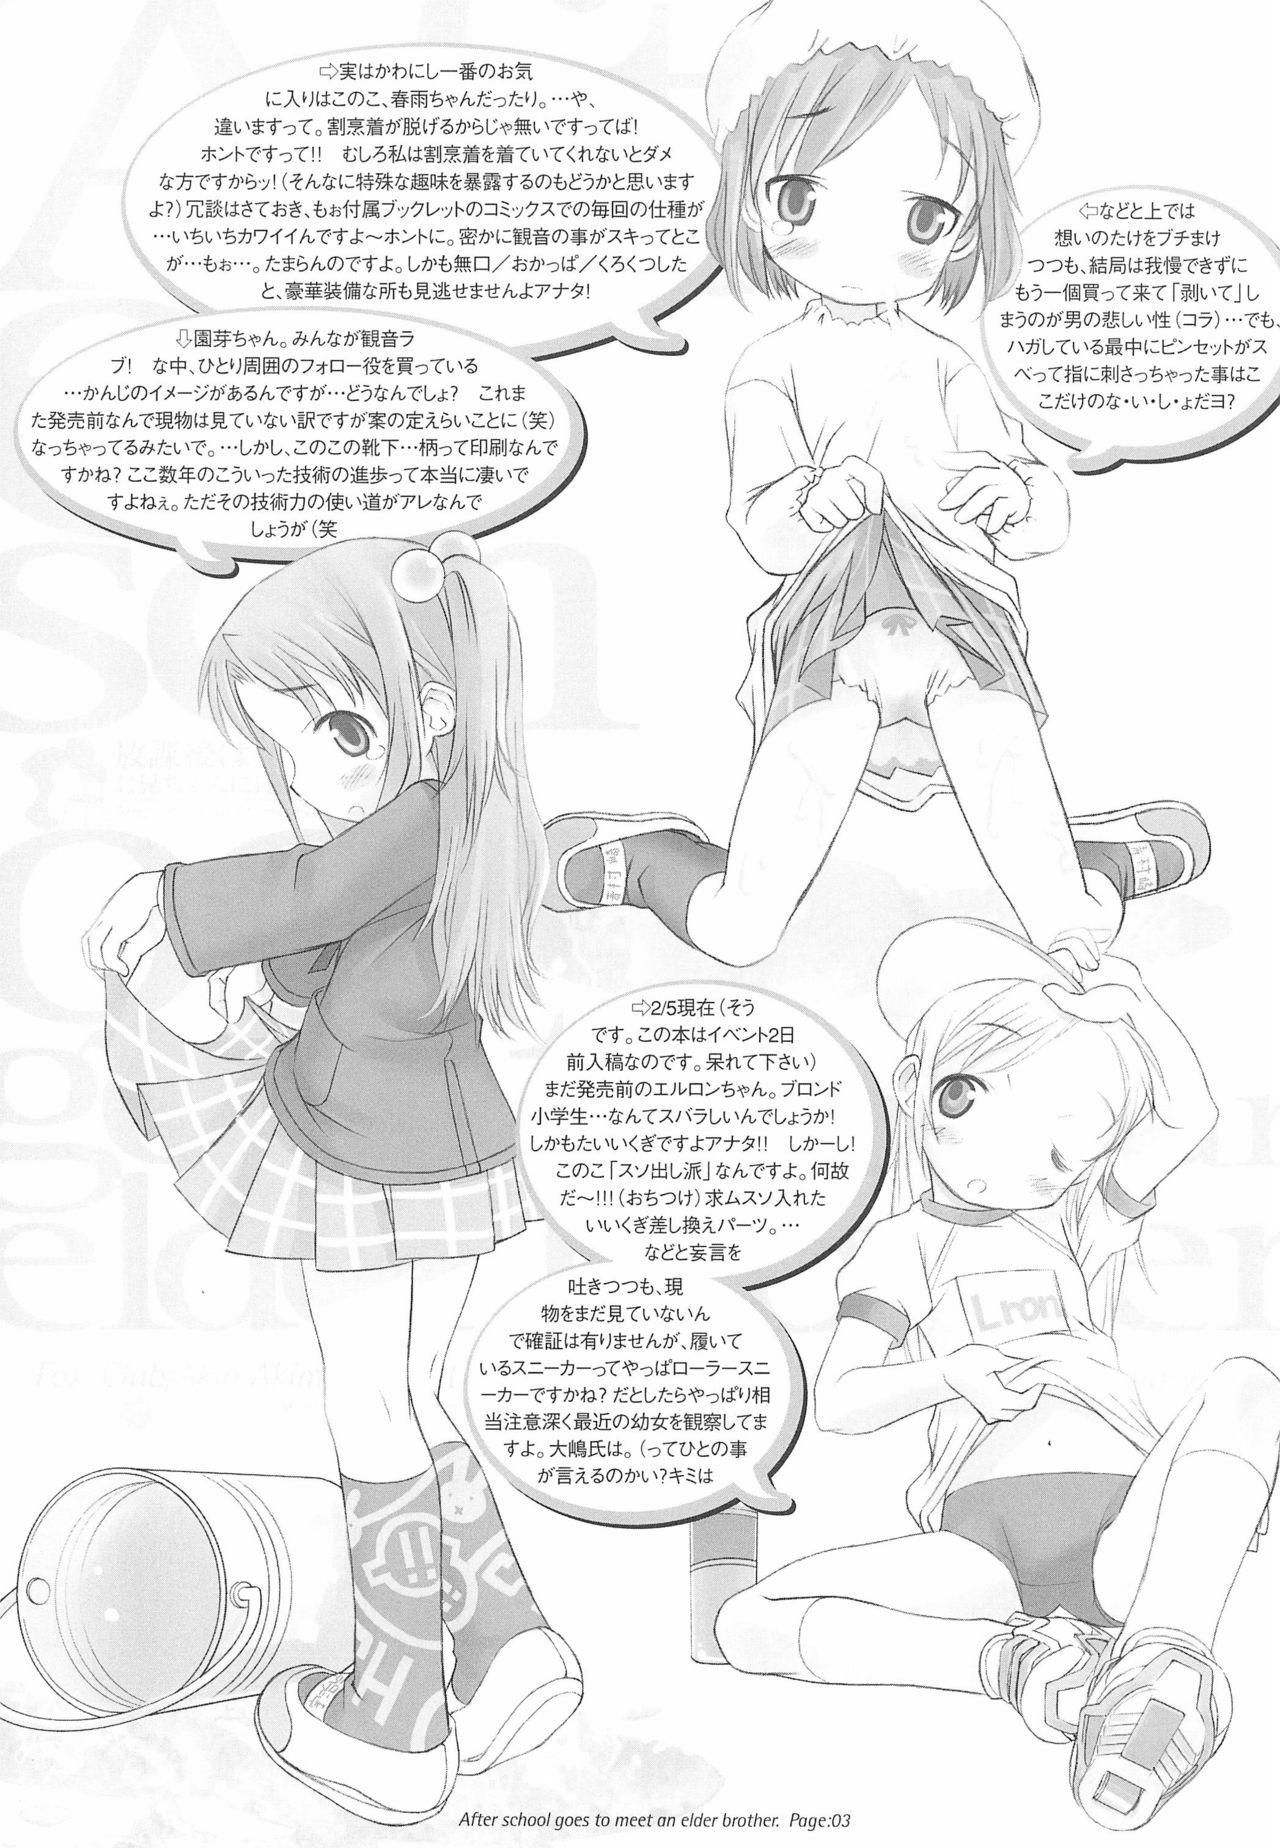 Tight Pussy After School Goes To Meet An Elder Brother - Shuukan watashi no onii-chan | weekly dearest my brother Gay Averagedick - Page 3